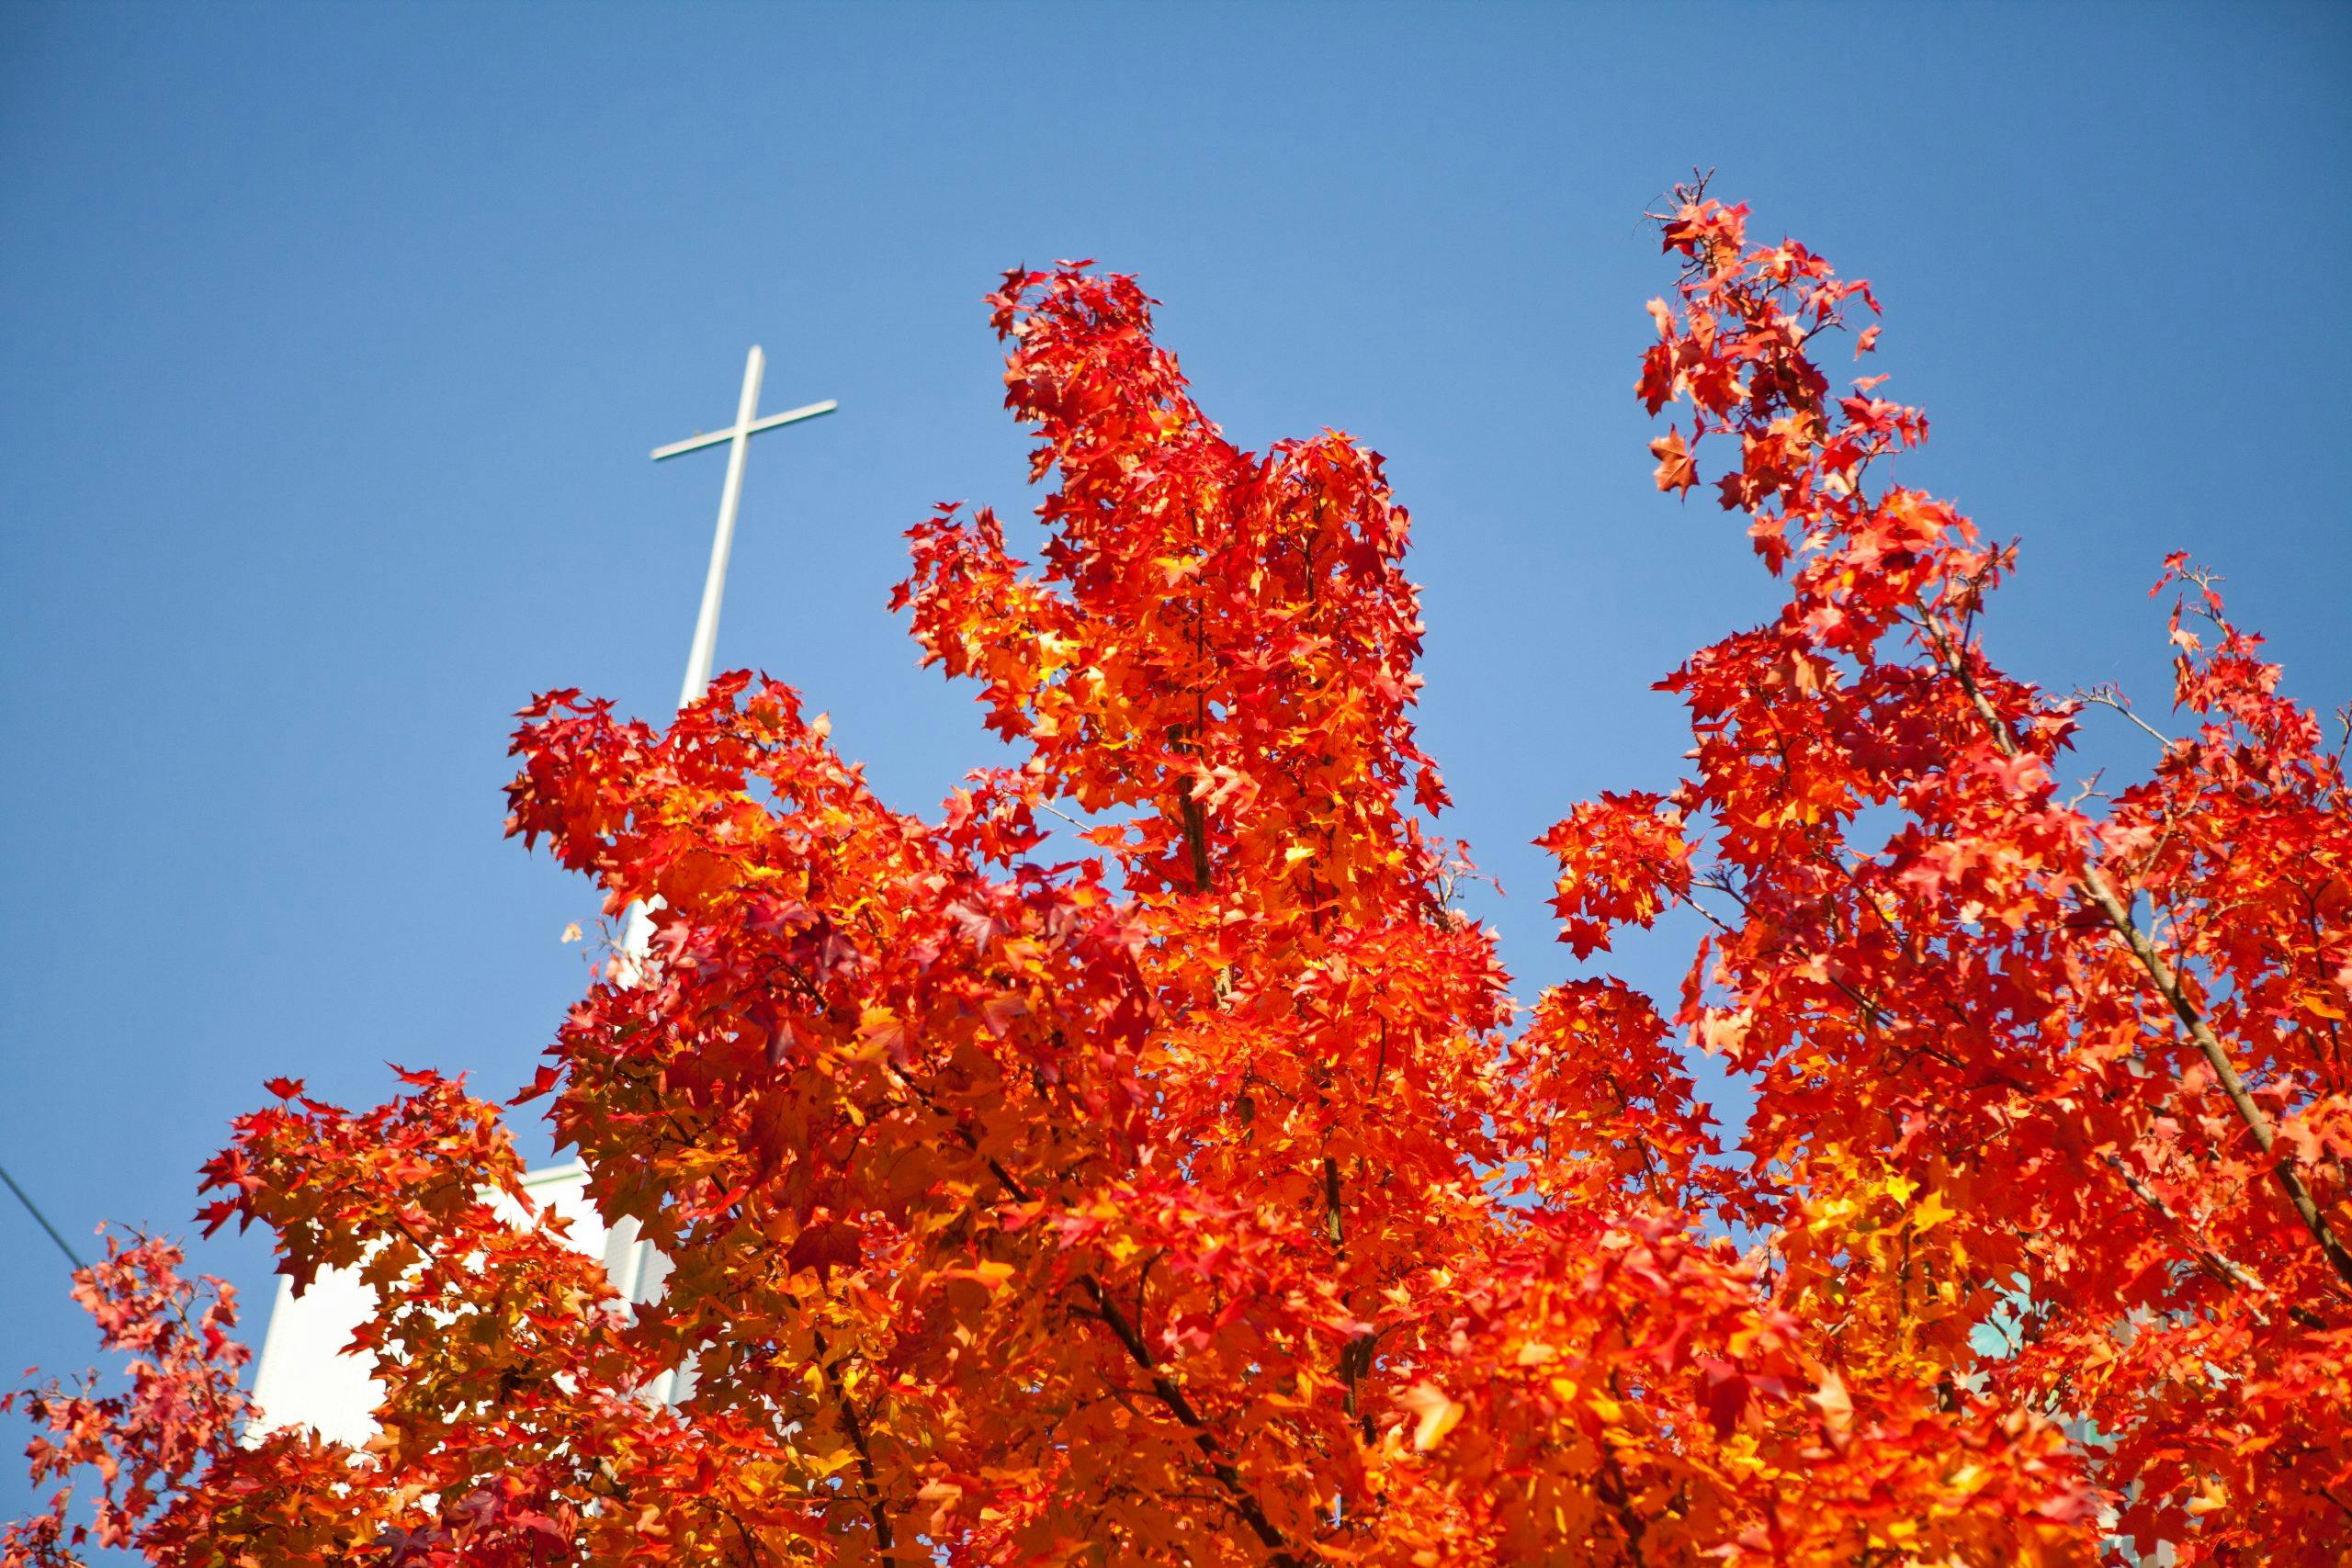 red fall leaves with Free Methodist cross in background